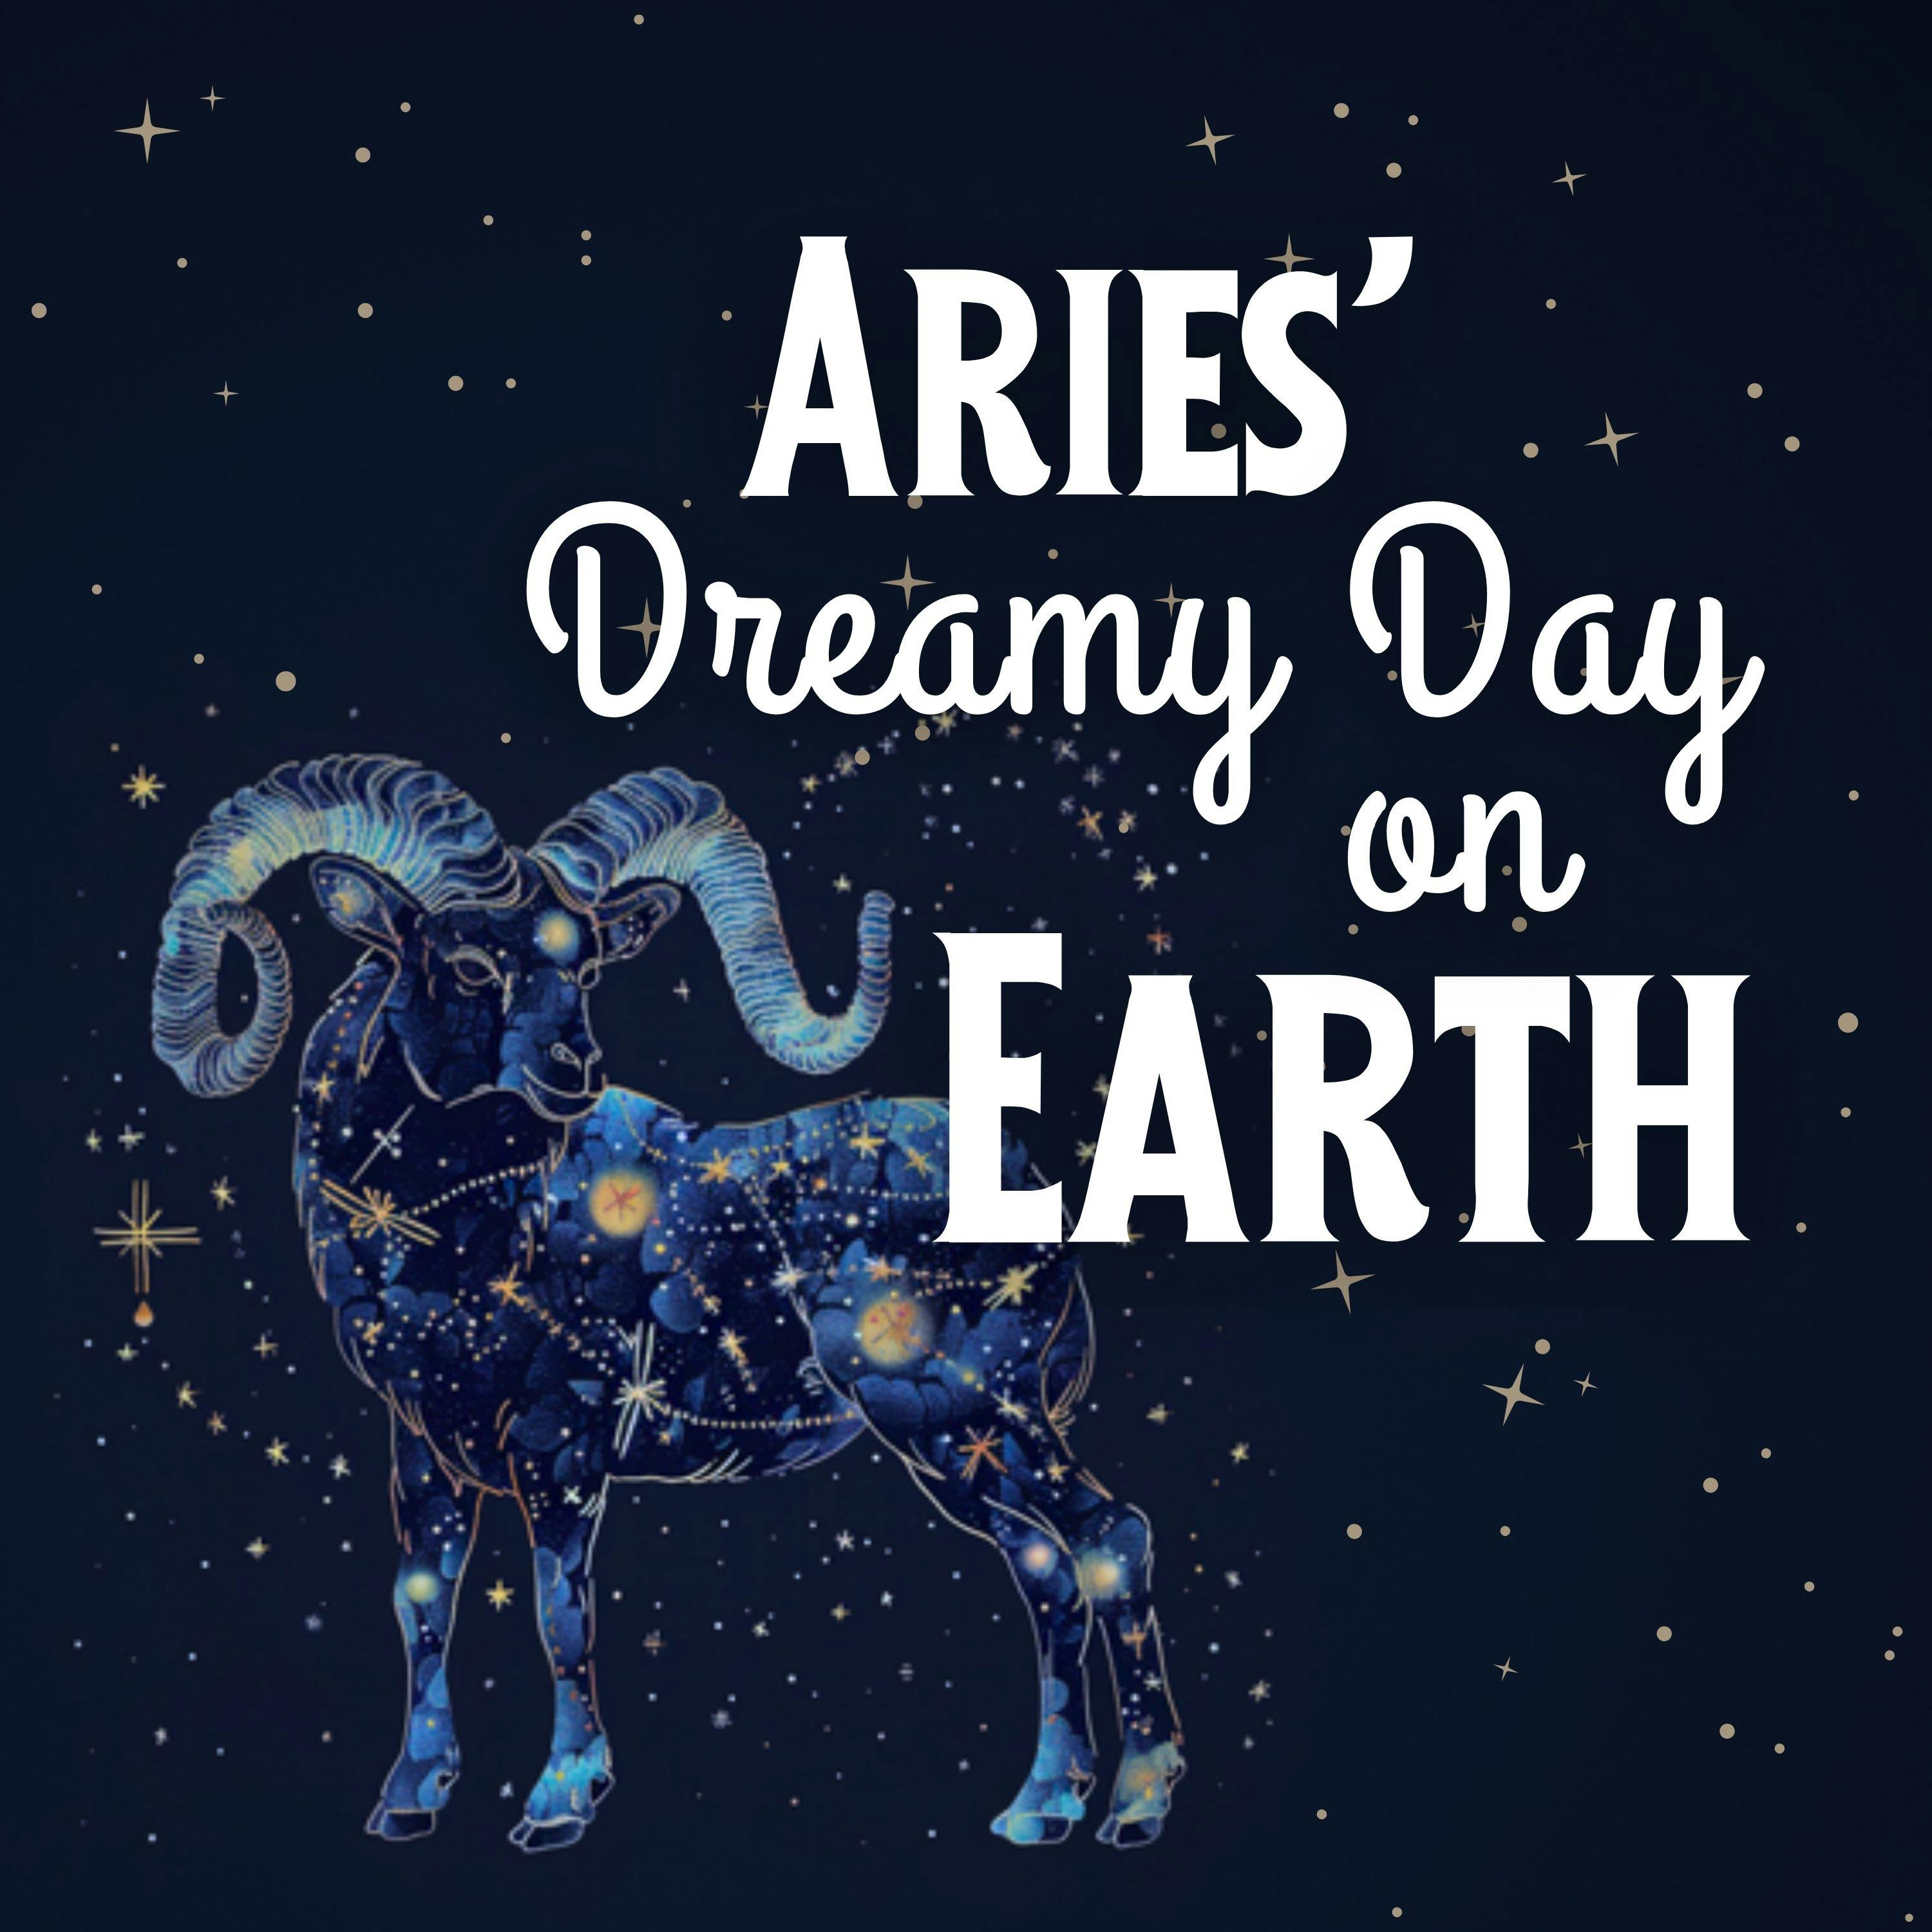 Aries’ Dreamy Day on Earth